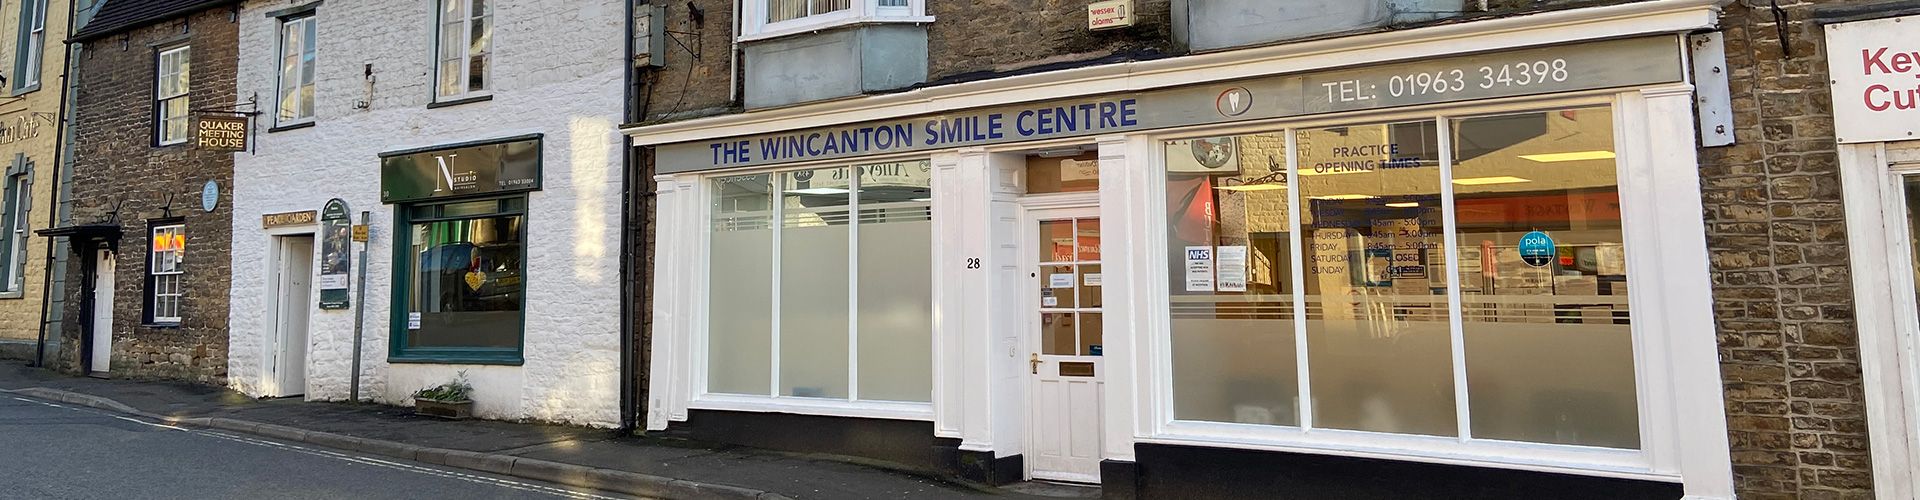 general dentistry and hygiene services at Wincanton Smile Dental Centre